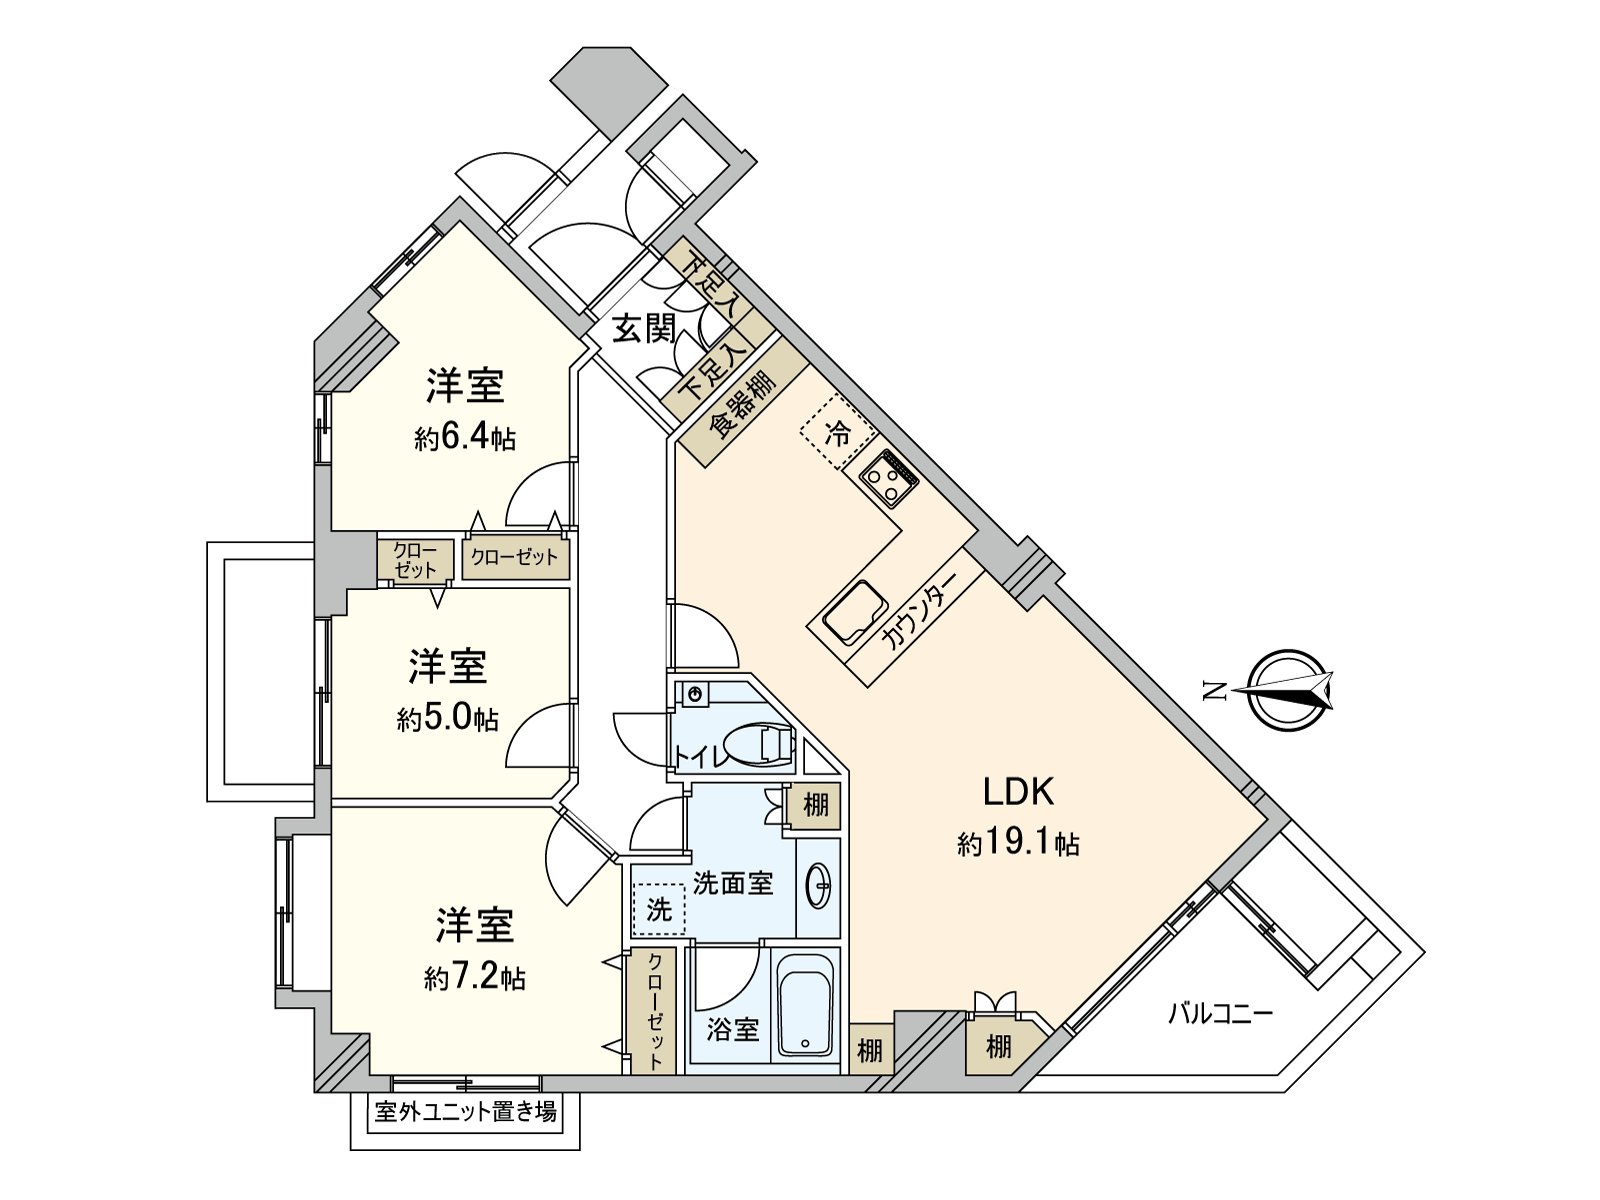 84.70 square meters of Exclusive area, Plan of the 3LDK